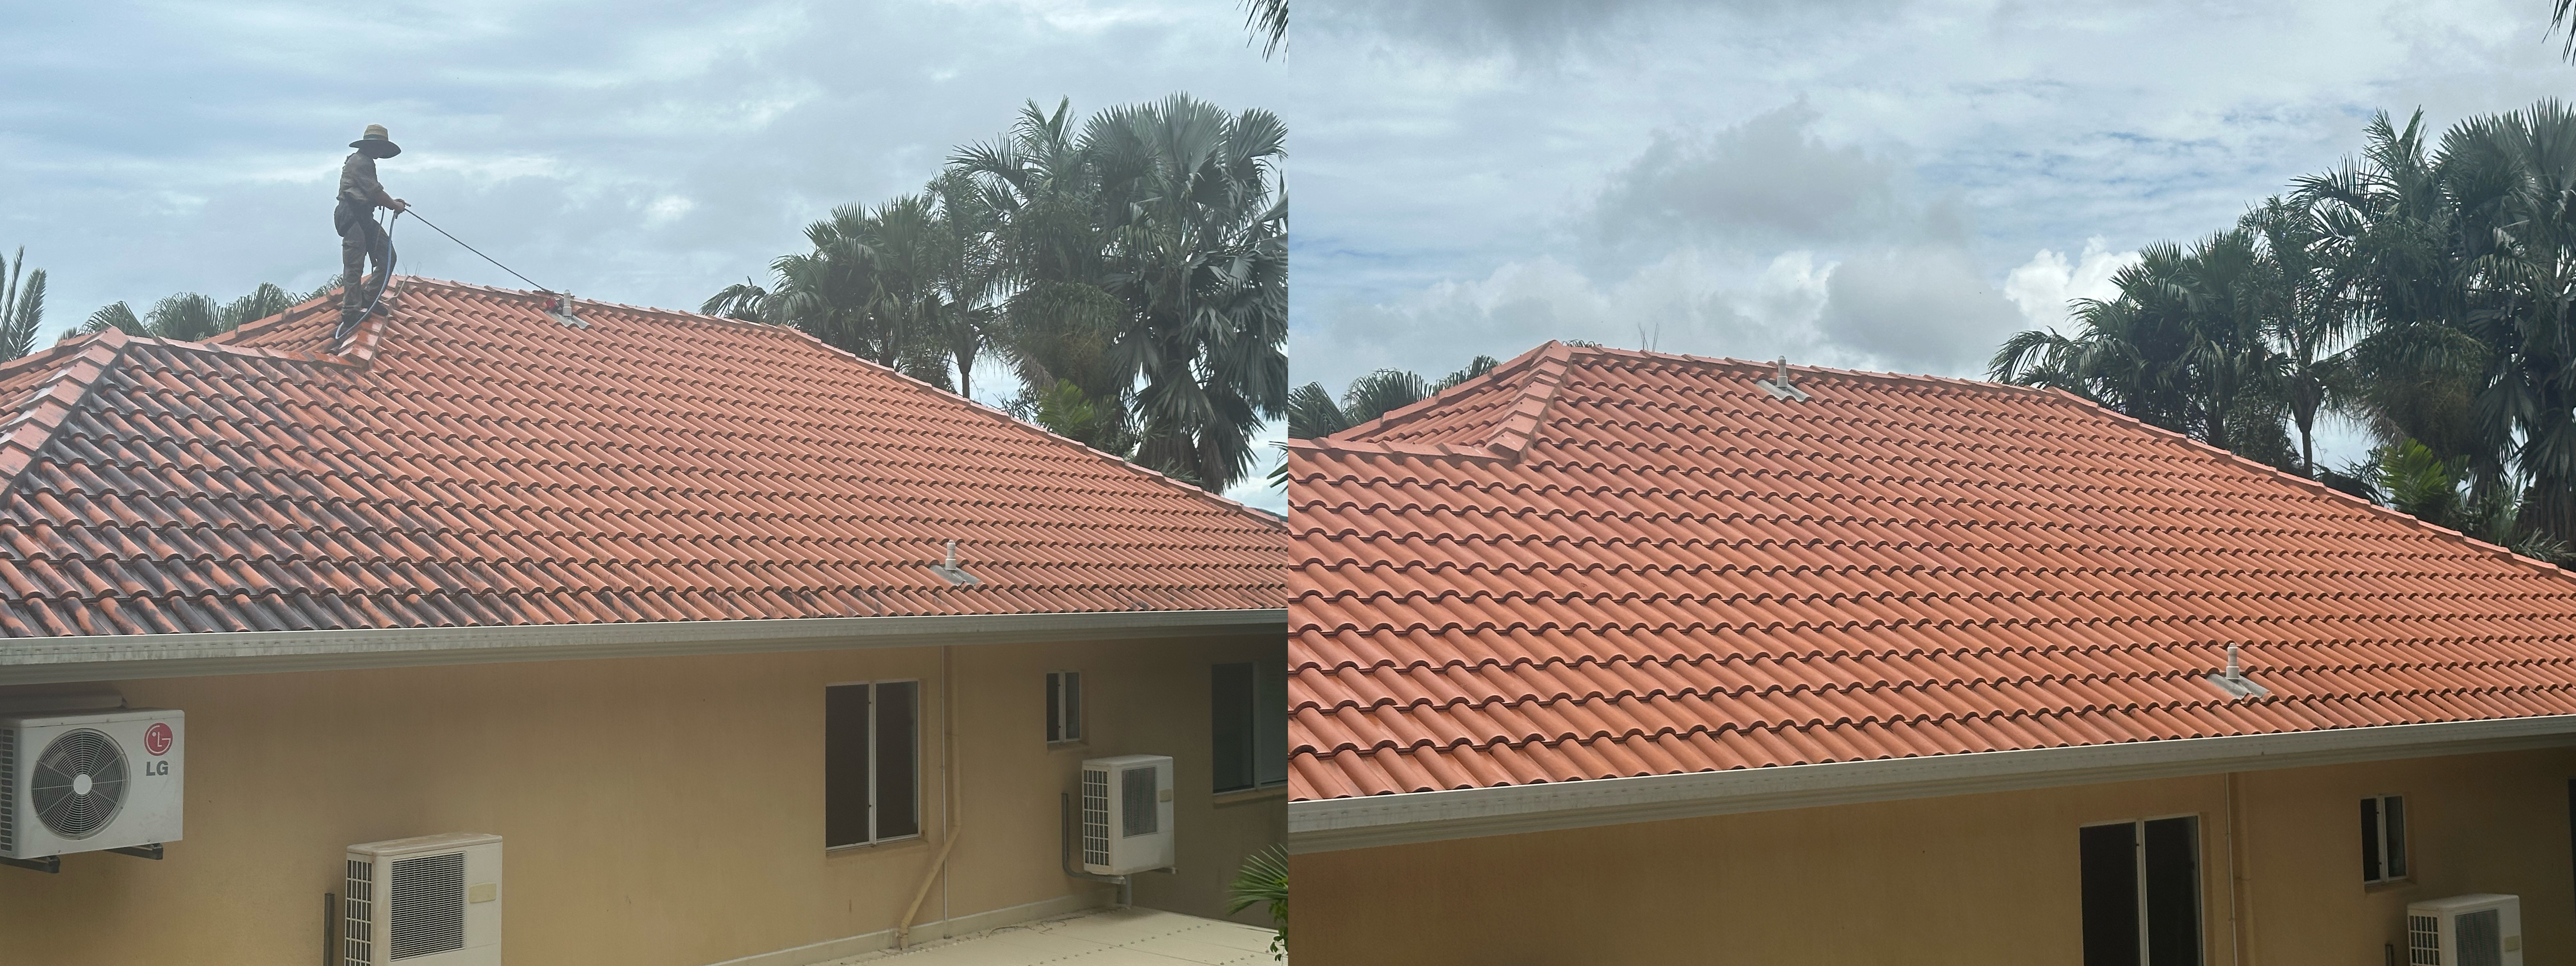 Tiled Roof Wash in Redlynch  Thumbnail